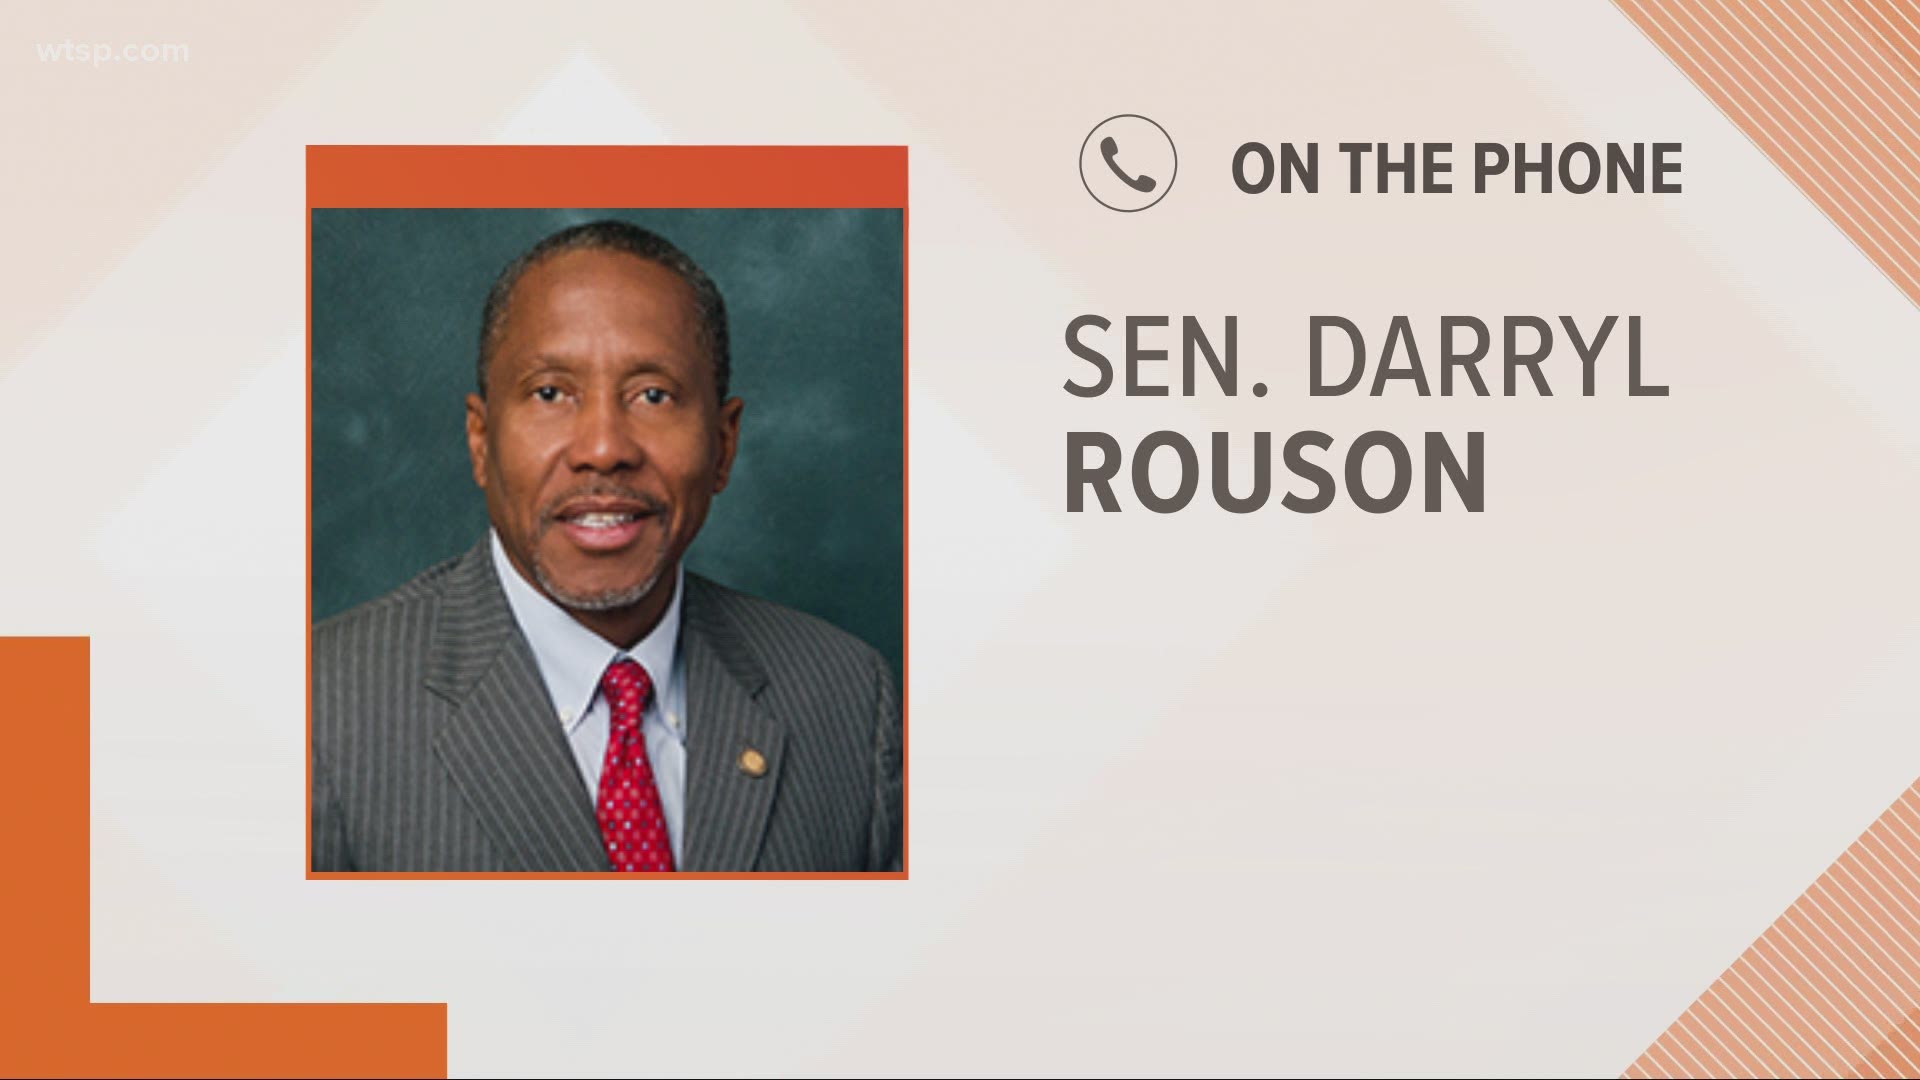 Sen. Darryl Rouson says people should have the right to be heard and peacefully protest.